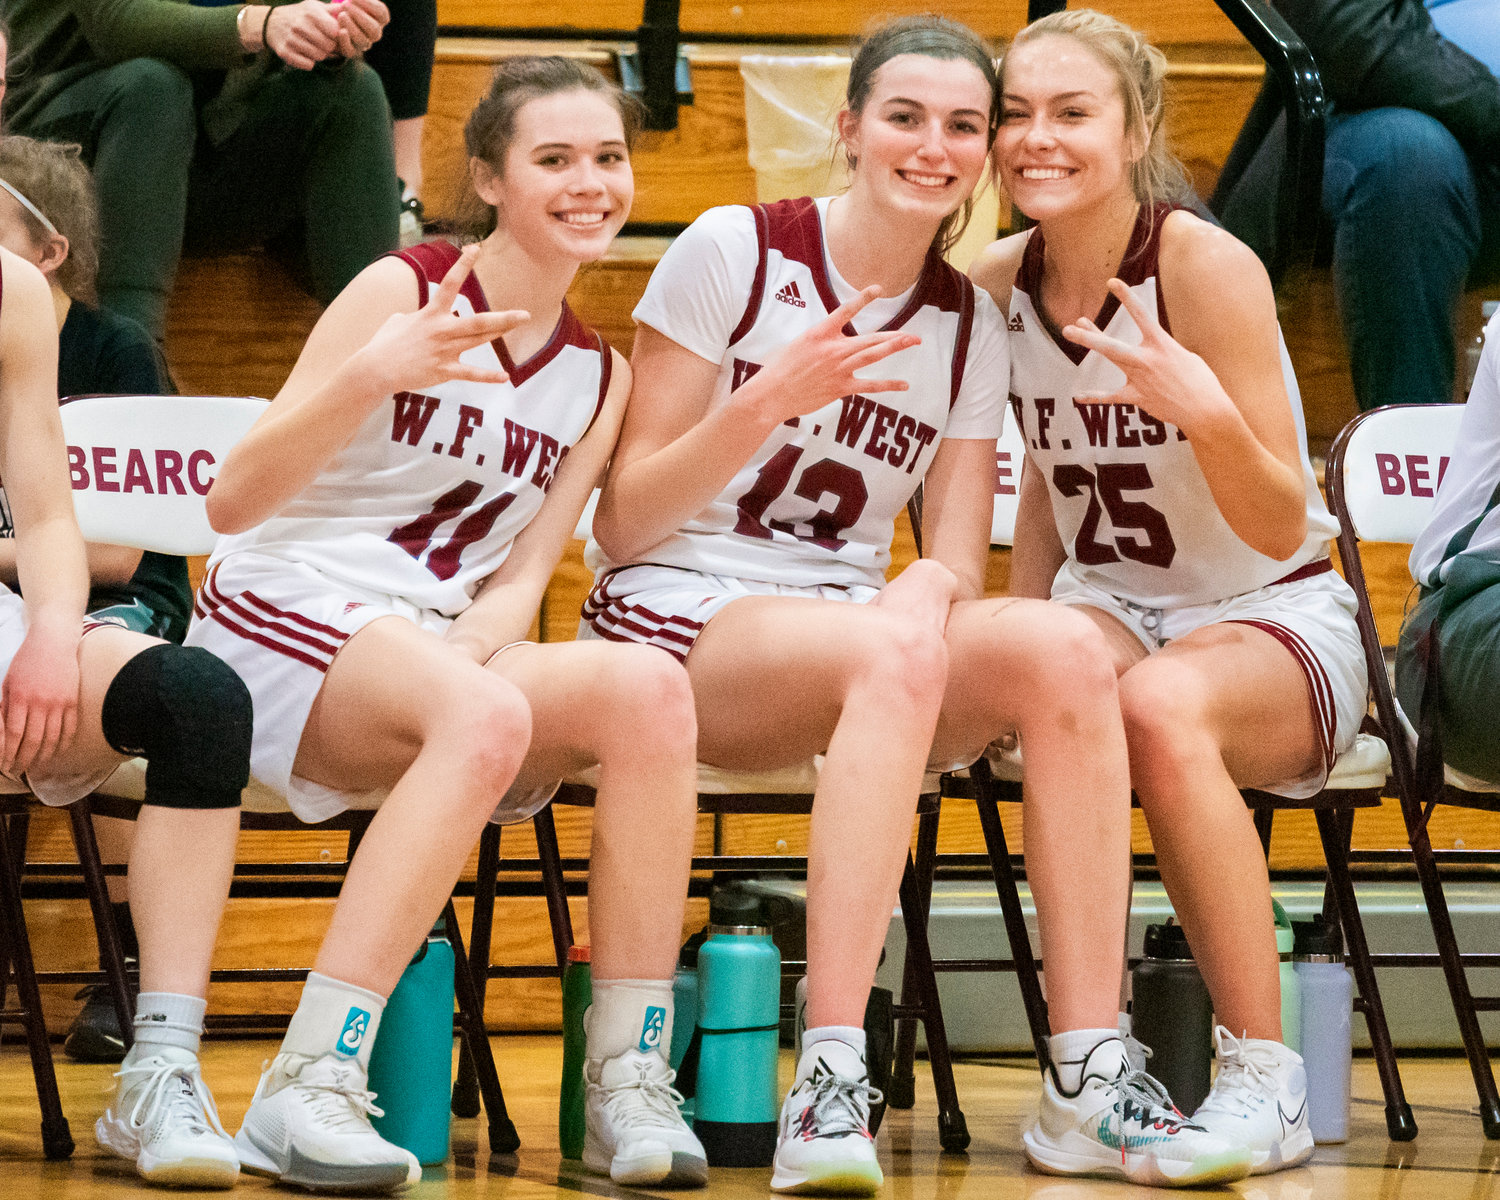 Bearcats Olivia Remund (11), Drea Brumfield (13), and Kayla Mccallum (25) throw their hands up smiling and pose Tuesday night at W.F. West High School.